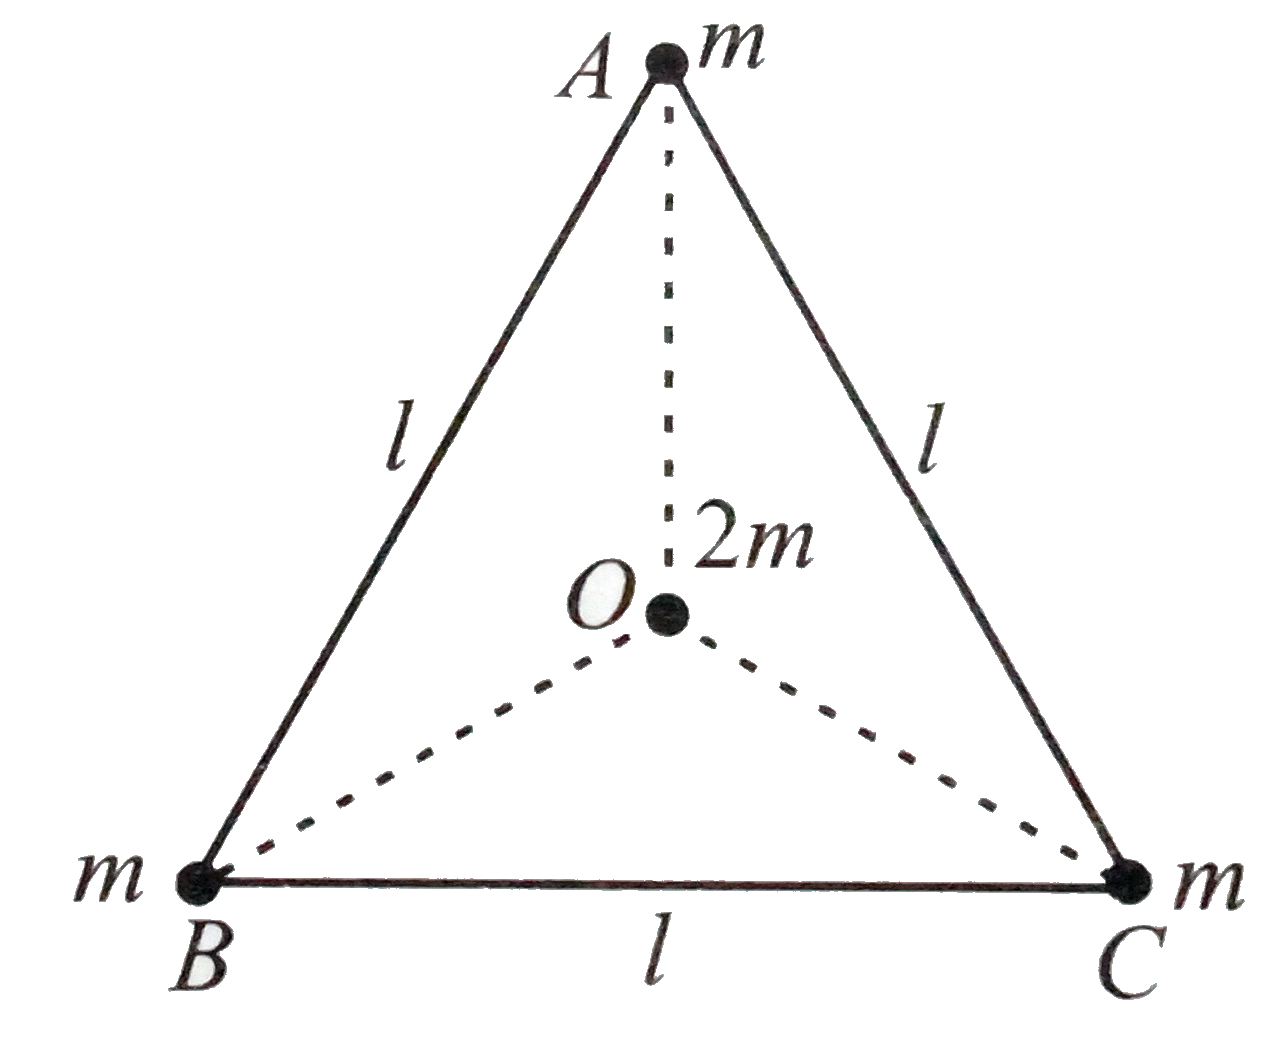 Three masses each of mass m are palced at the vertices of an equilateral triangles ABC of side l as shown in figure. The force acting on a mass 2m placed at the centroid O of the triangle  is